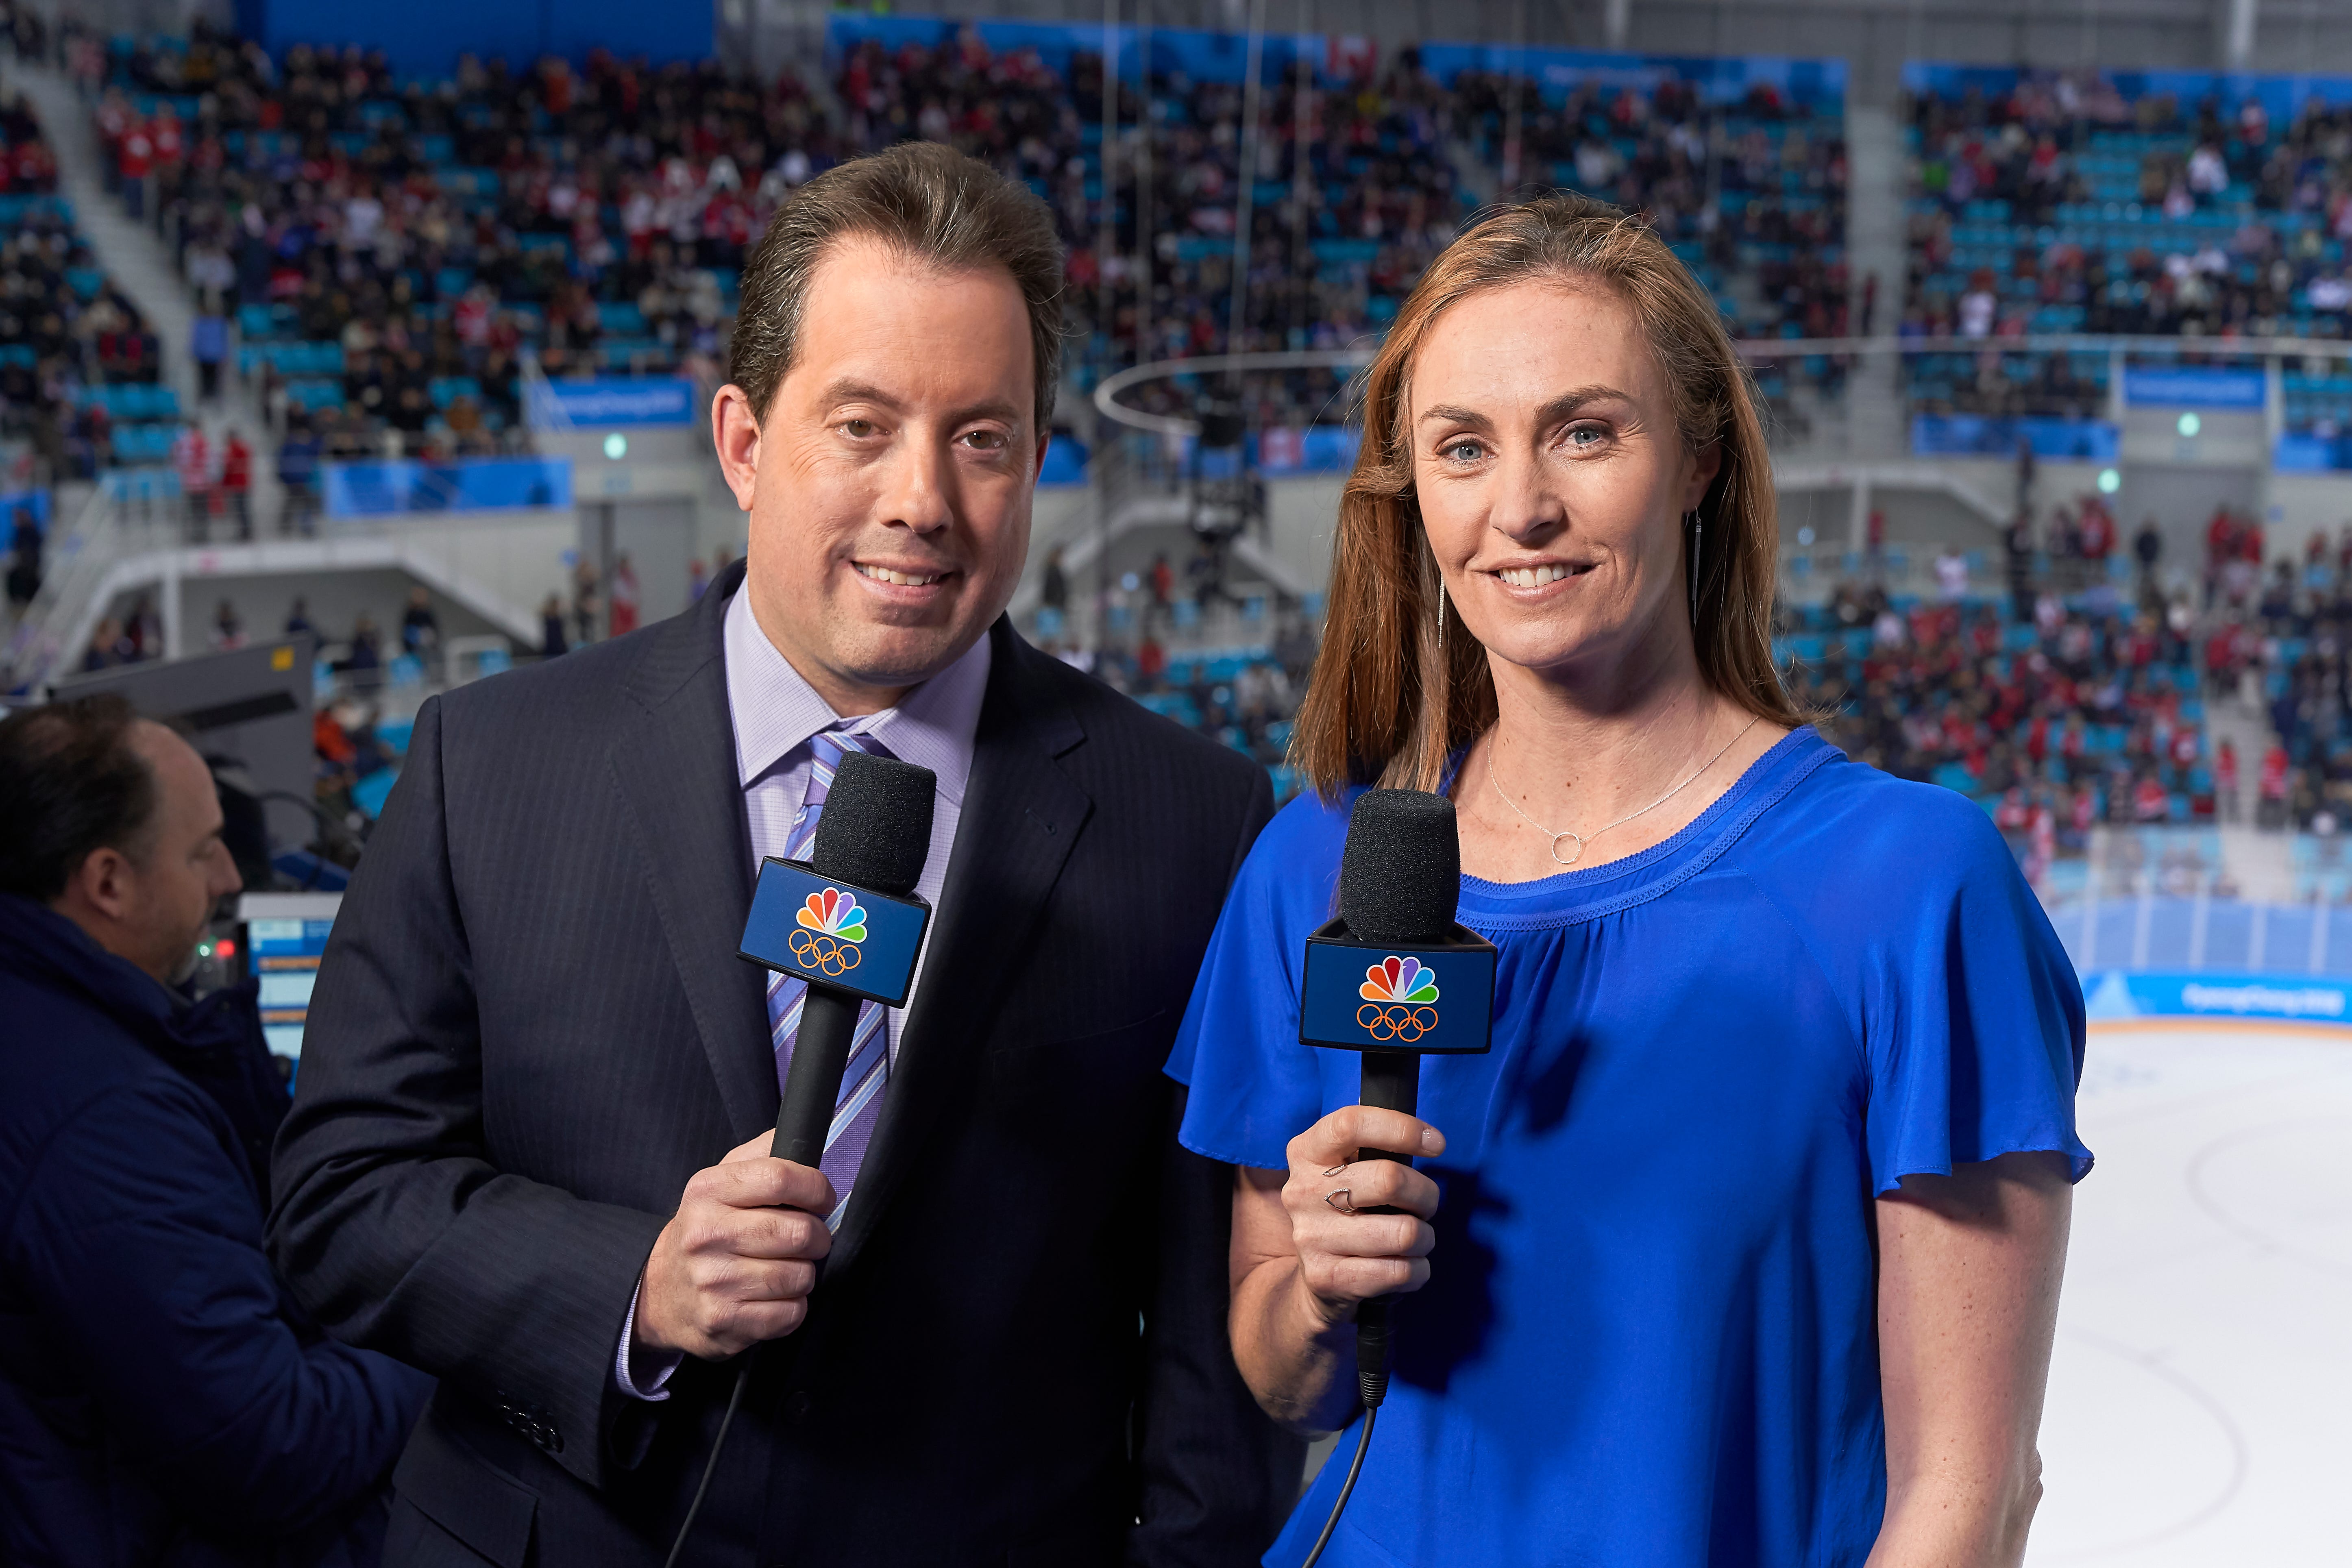 Former women's hockey star AJ Mleczko back in TV booth for NHL playoffs second round